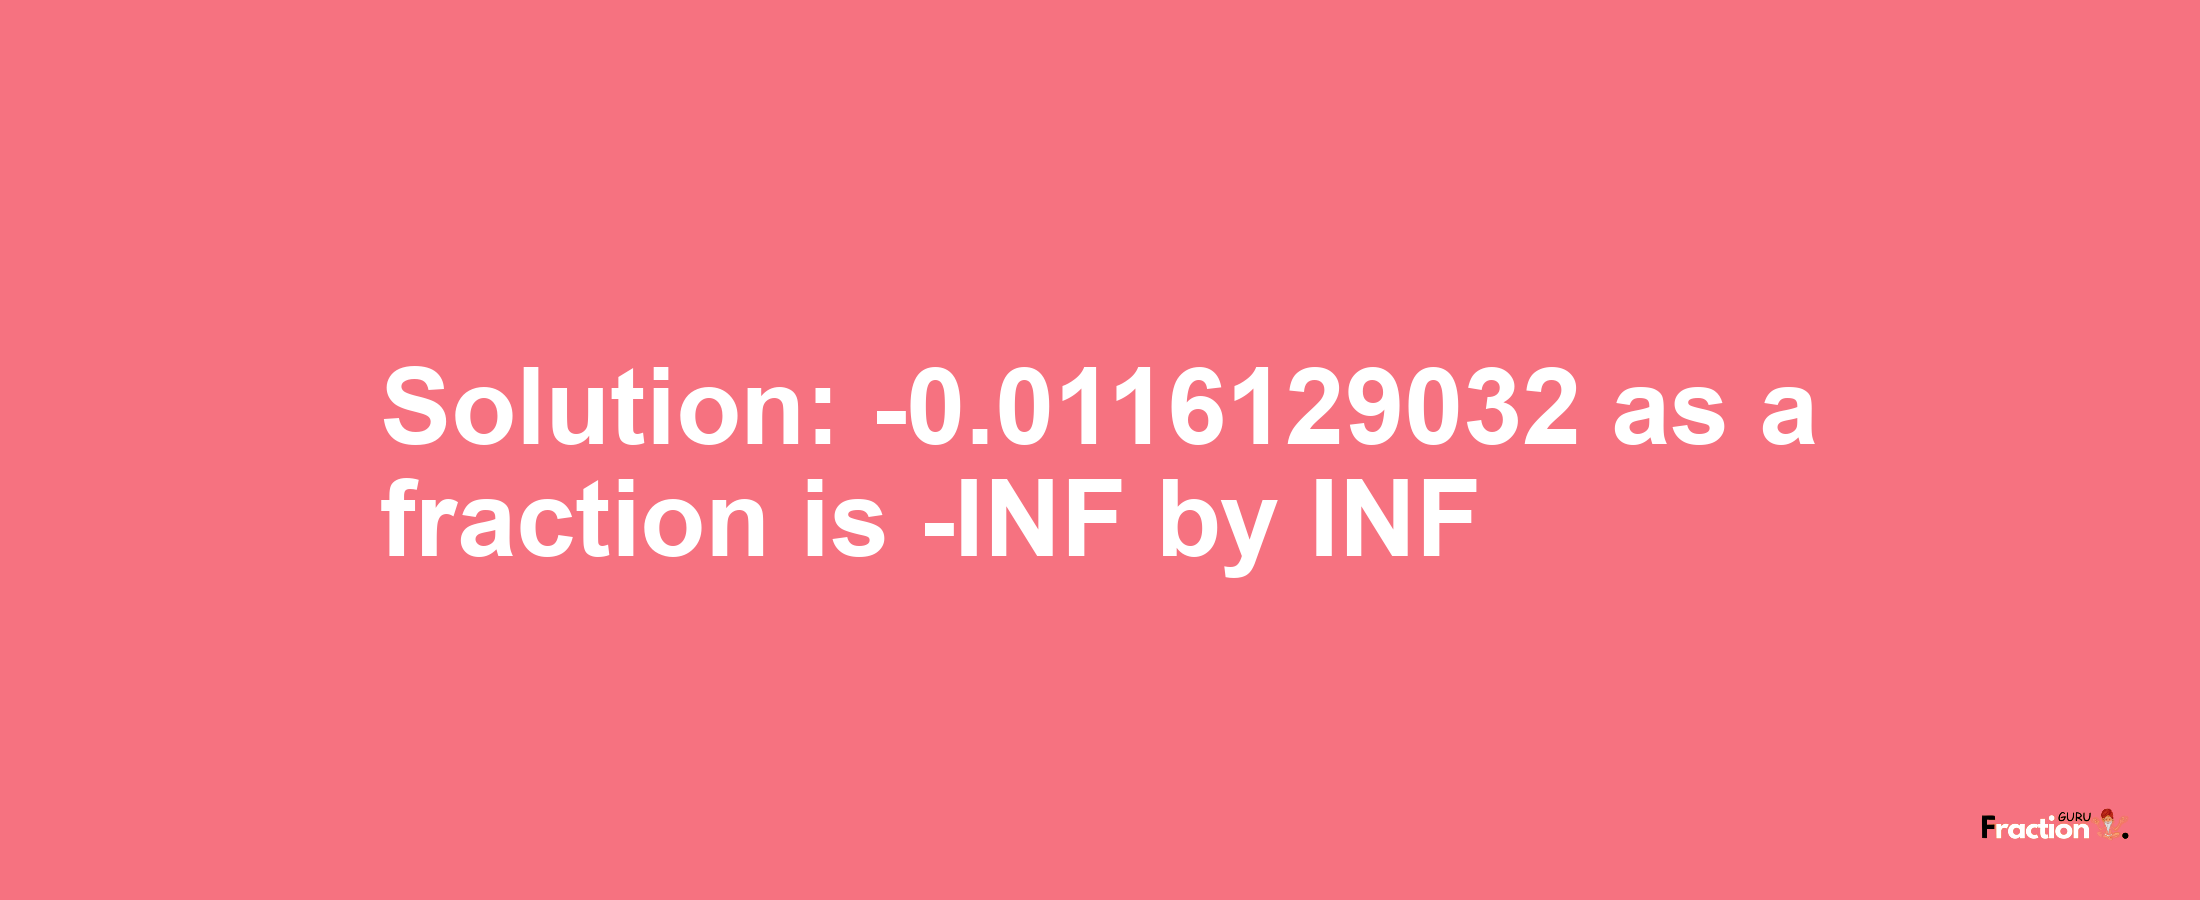 Solution:-0.0116129032 as a fraction is -INF/INF